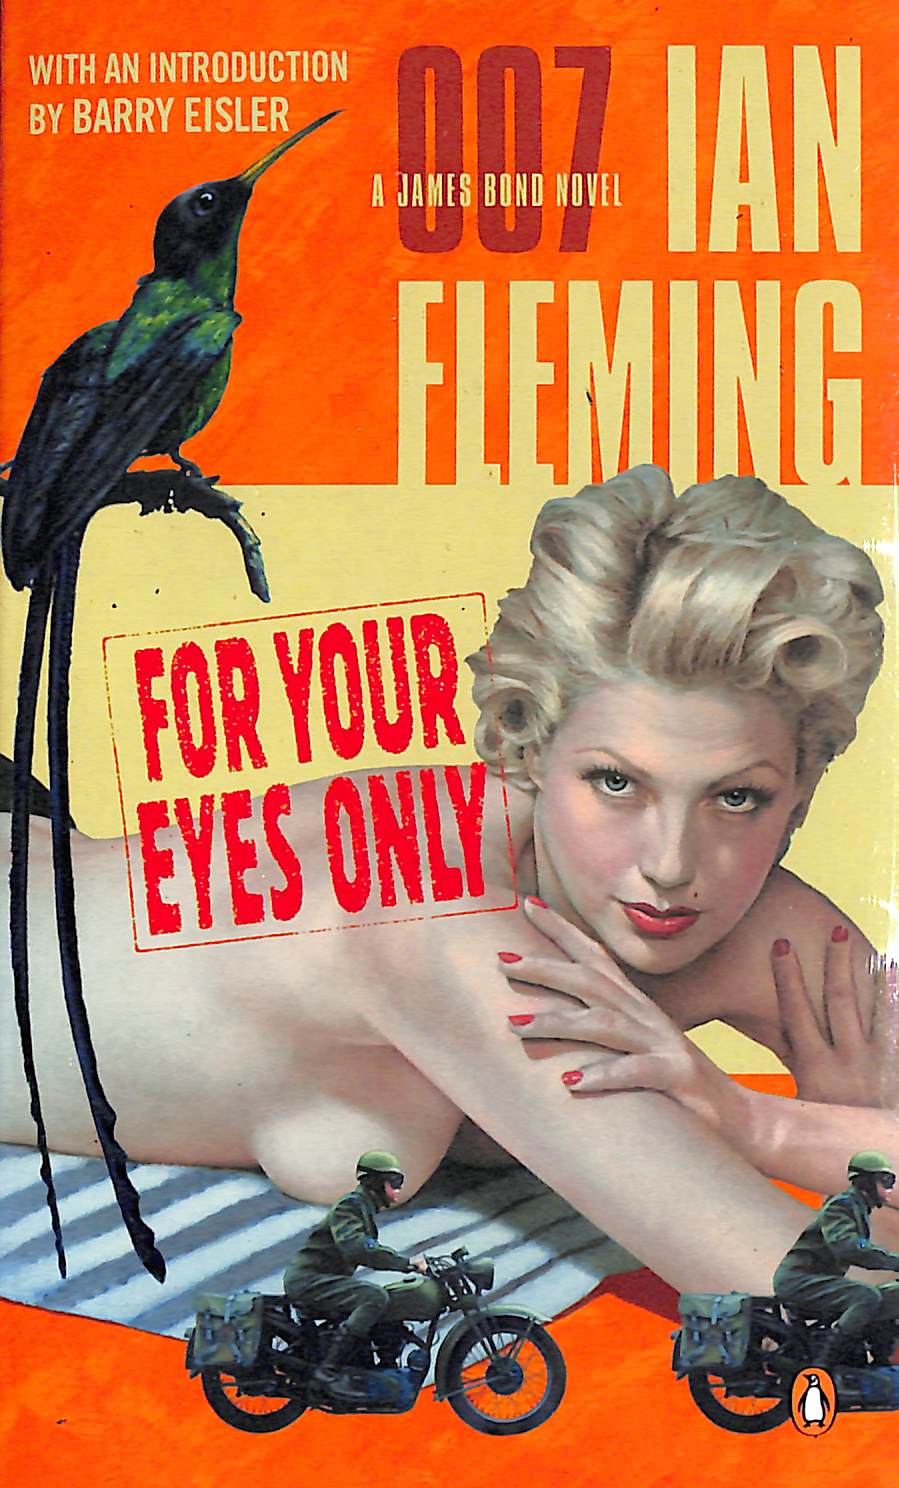 "For Your Eyes Only" 2006 FLEMING, Ian